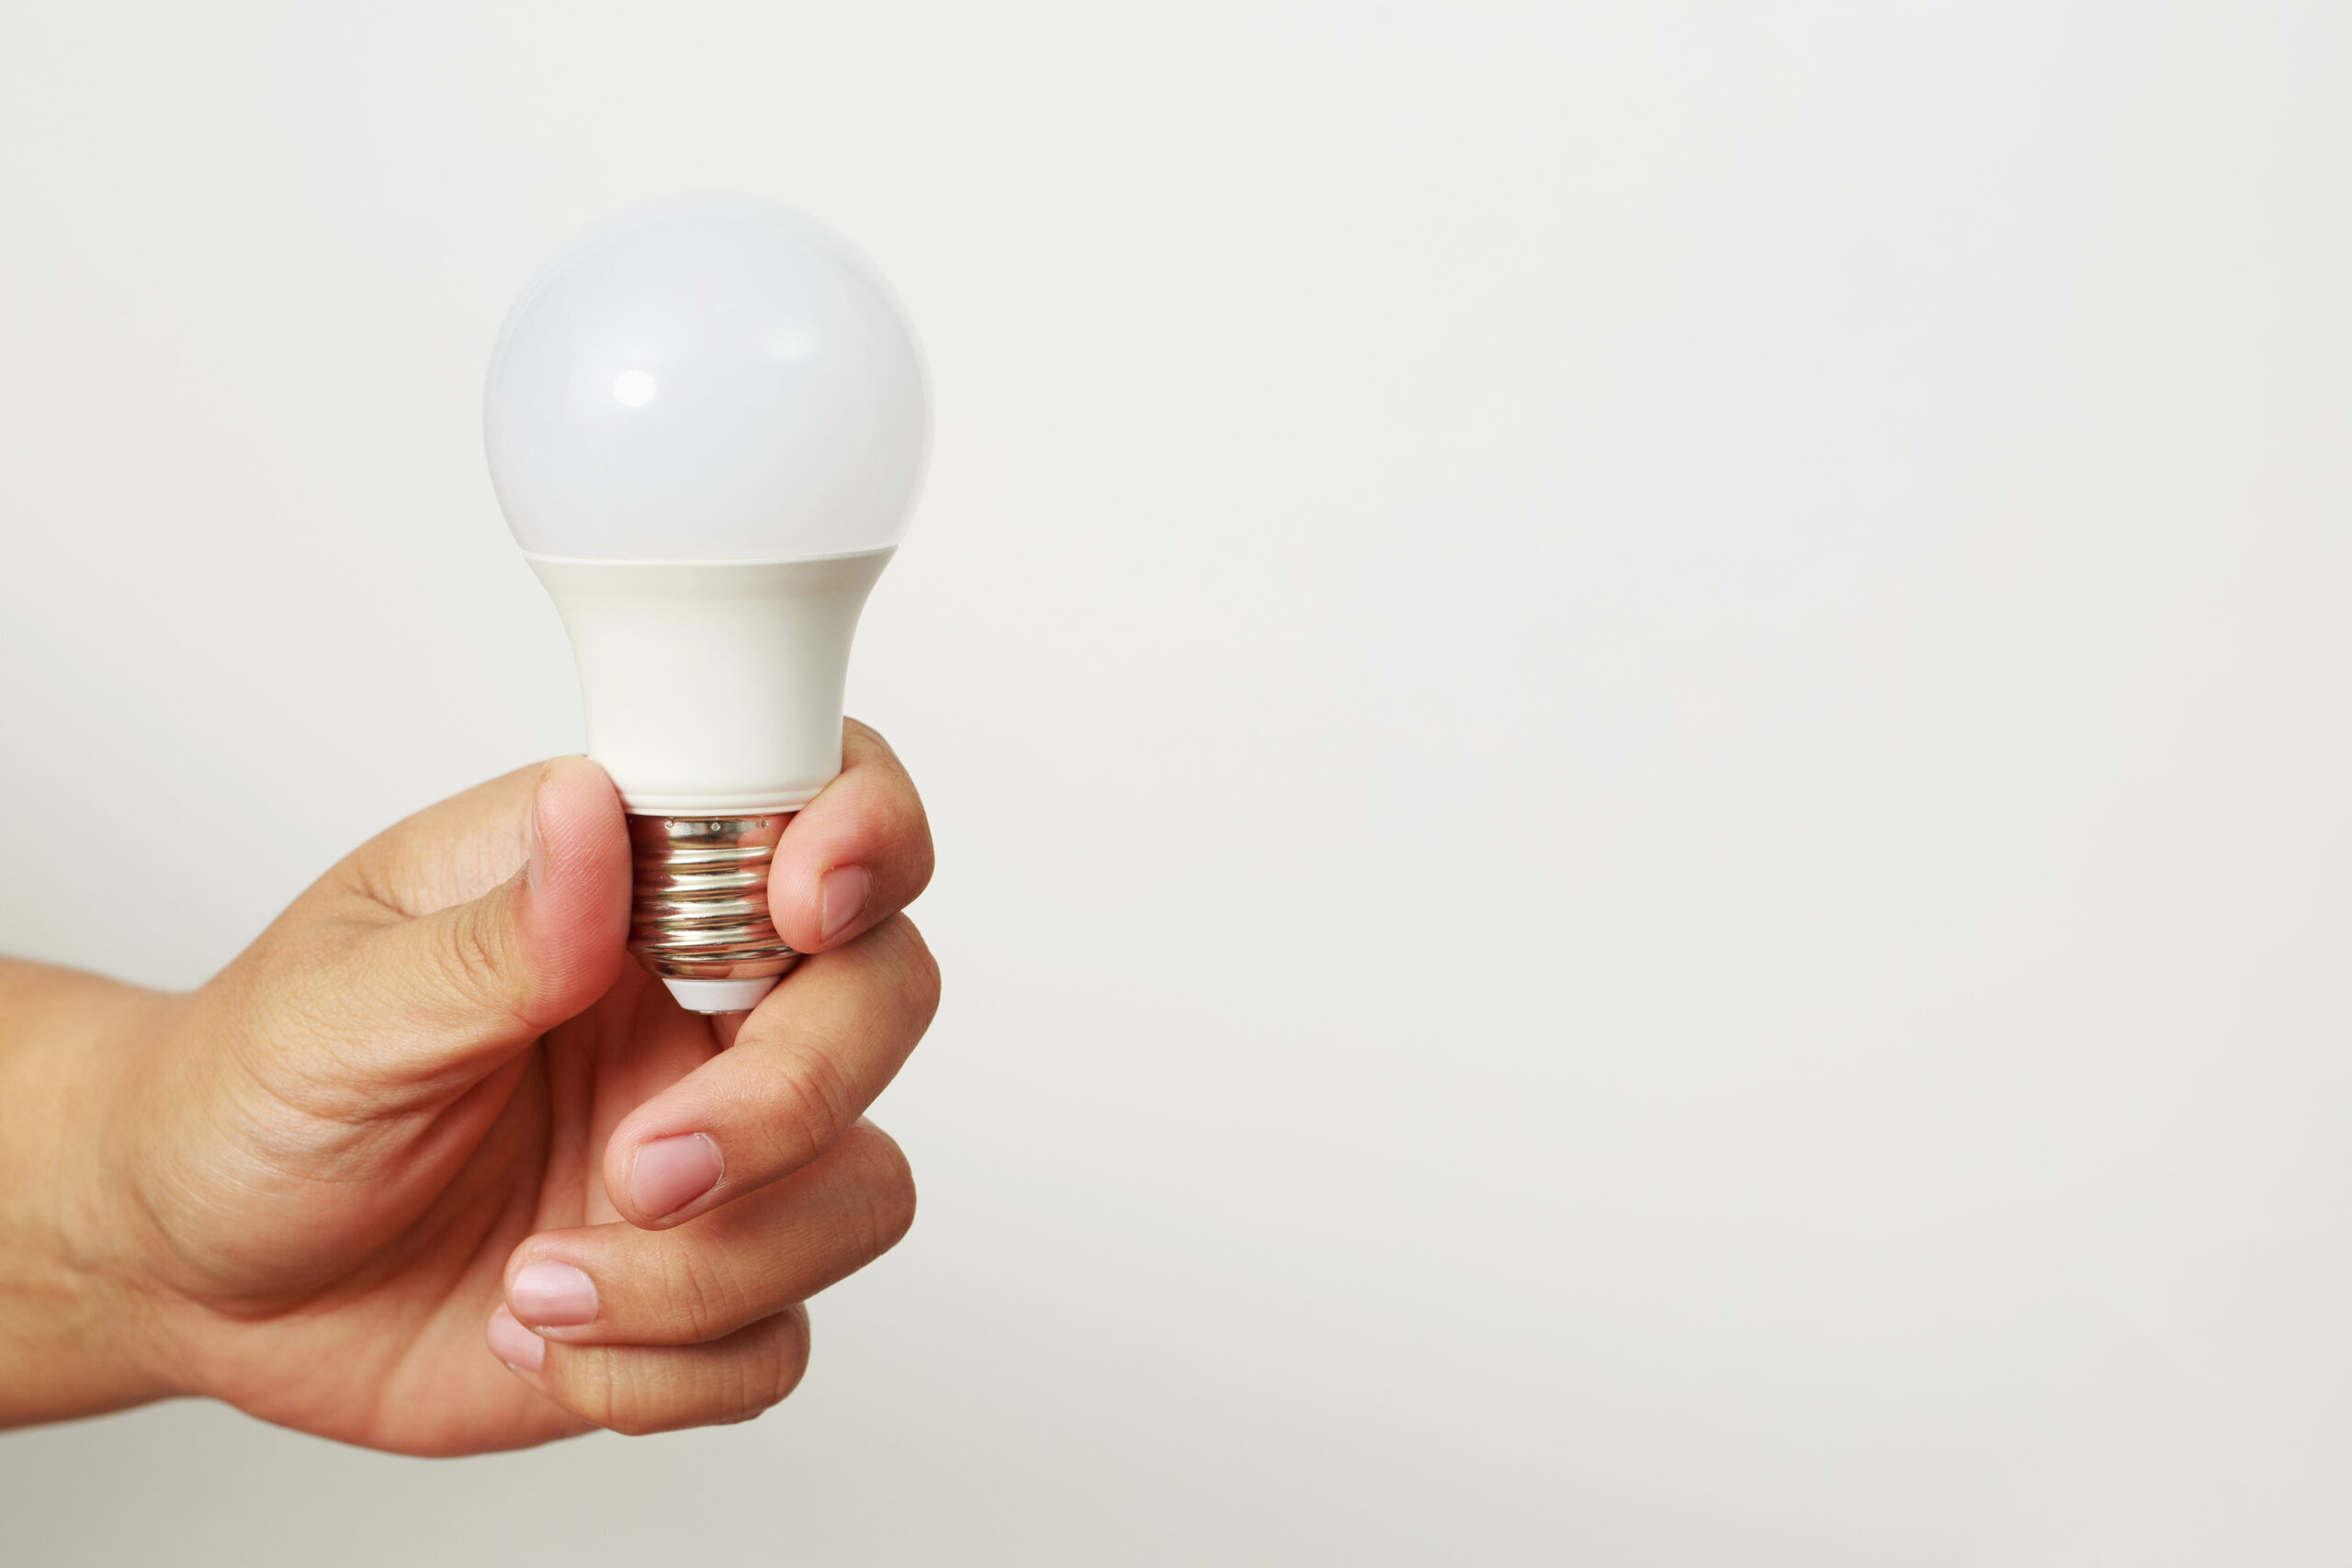 LED bulbs can save you almost double your electricity bill.